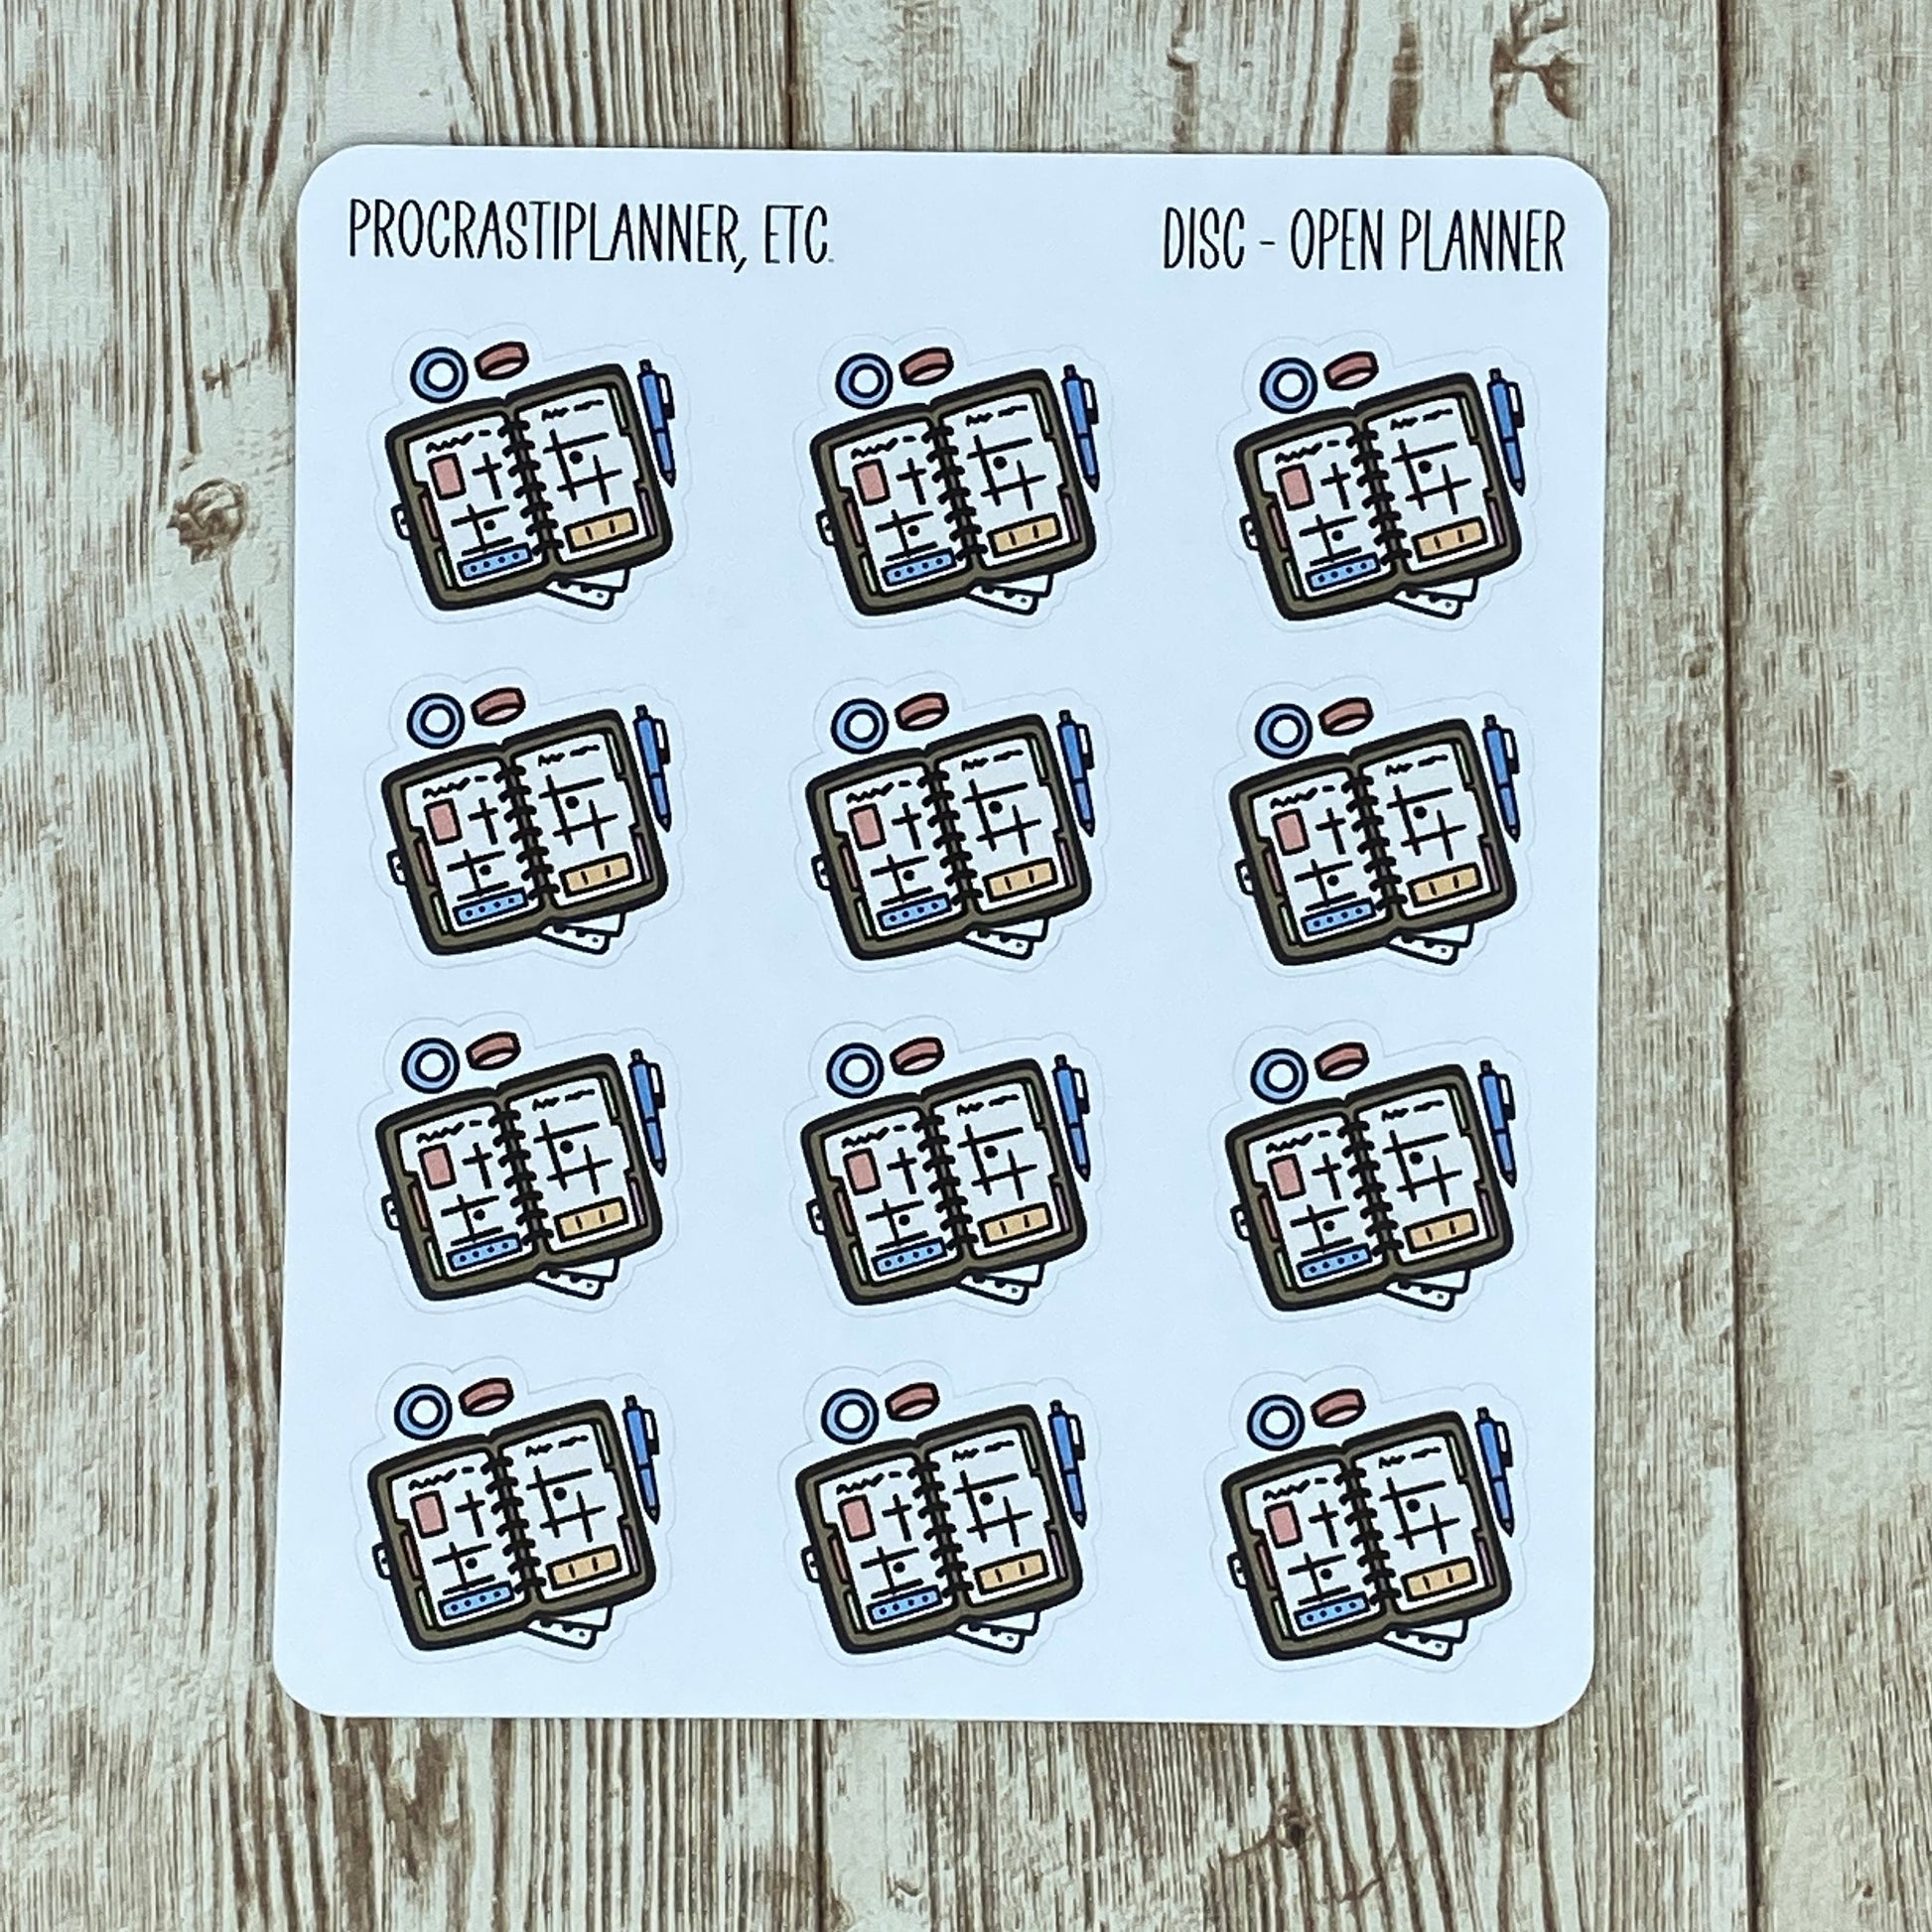 Open Face Disc Planner - Planner Stickers for Agendas, Journals and Scrapbooking